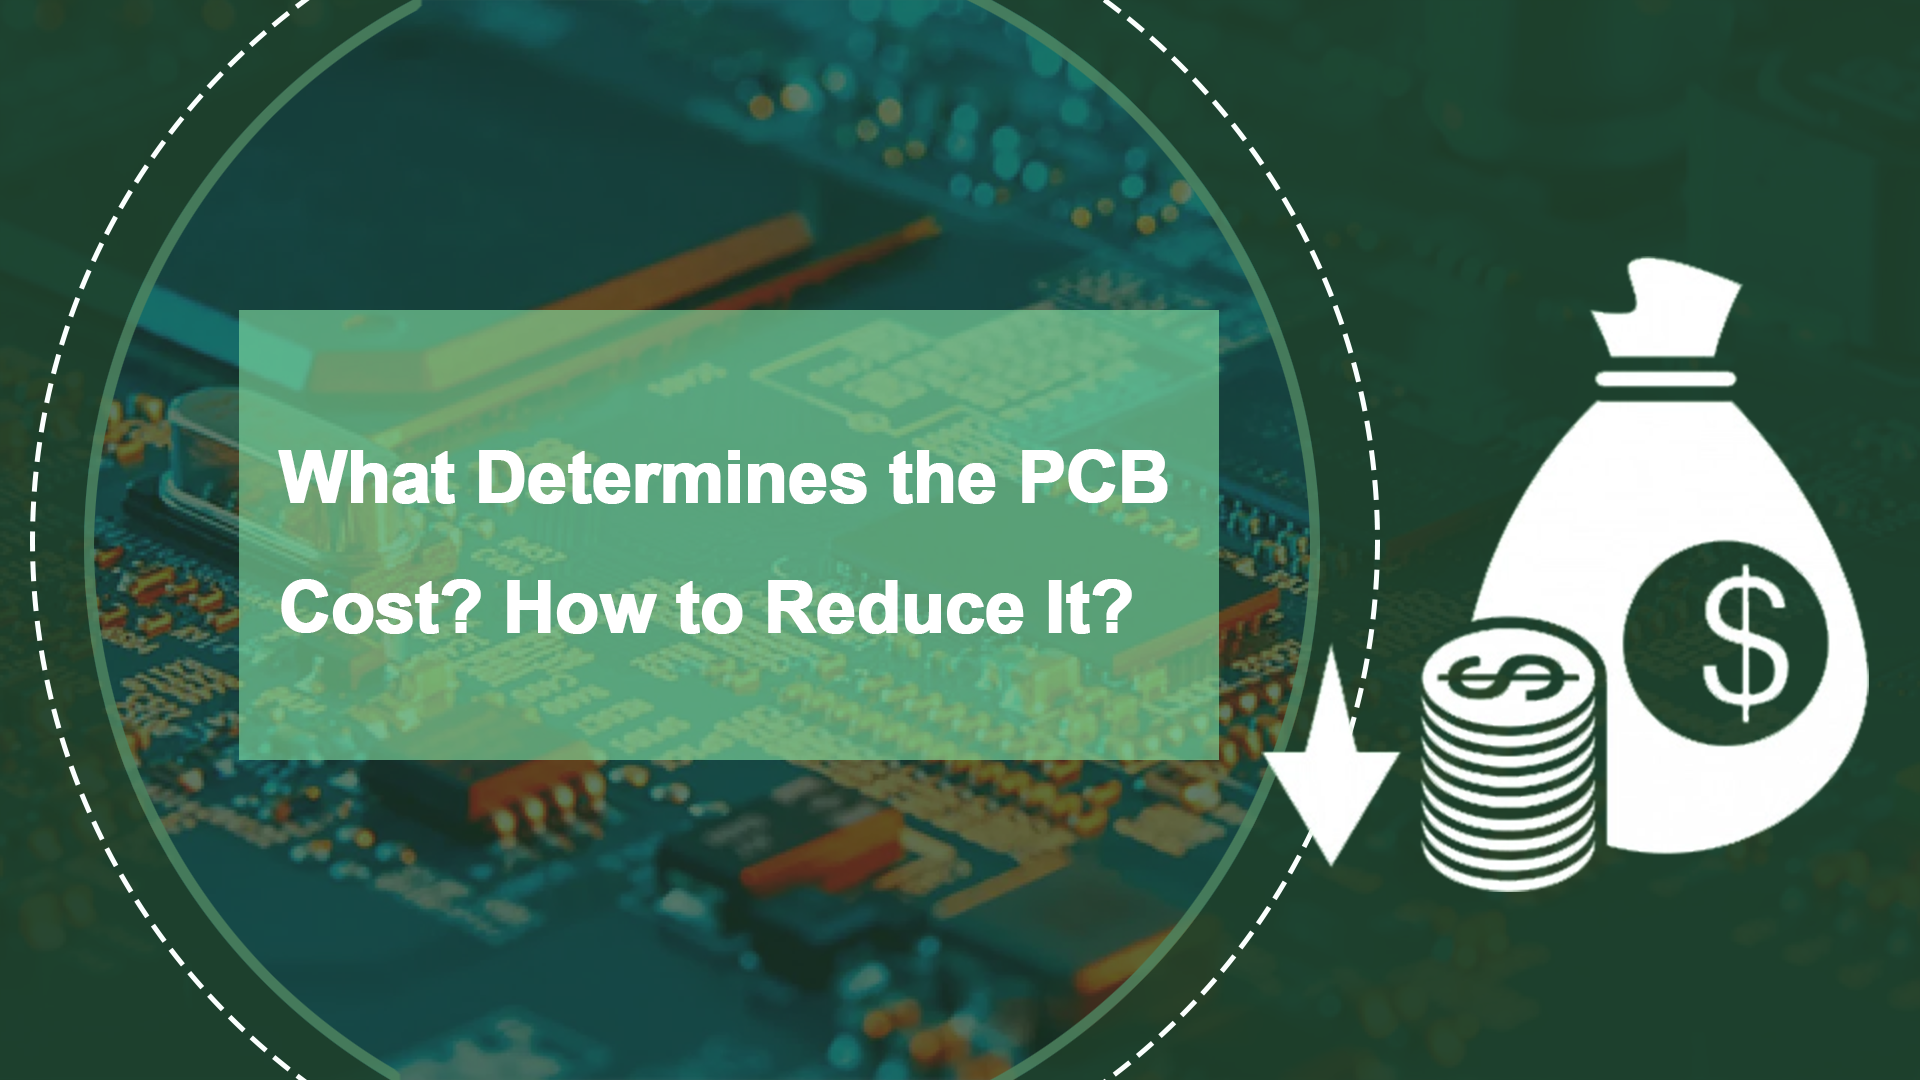 What Determines the PCB Cost